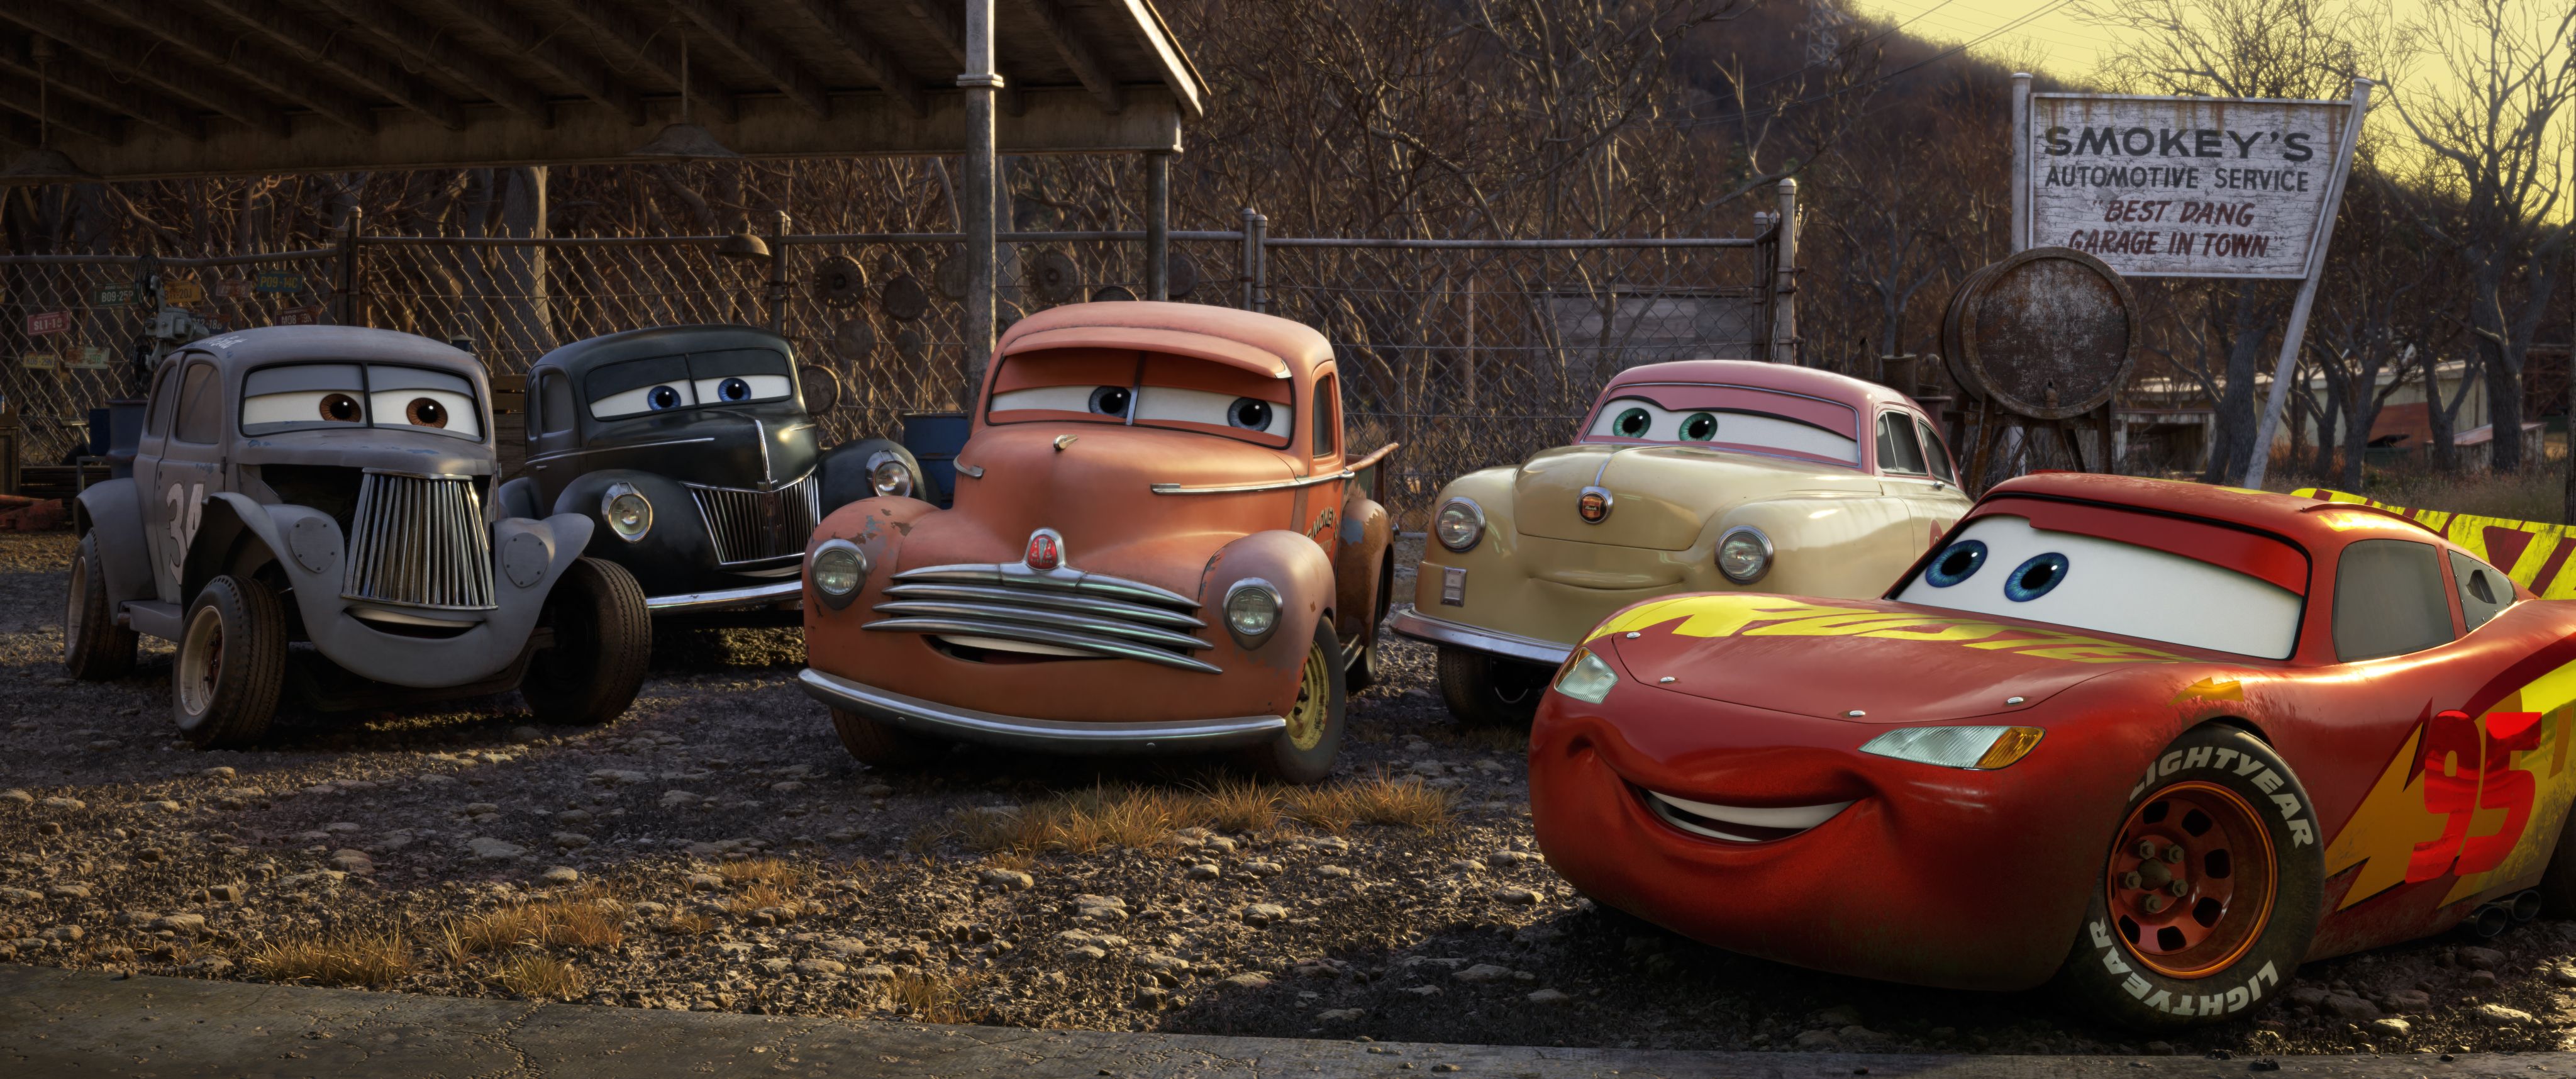 Cars 3 Review: Pixar's Latest Finds a Comfortable Speed | Collider